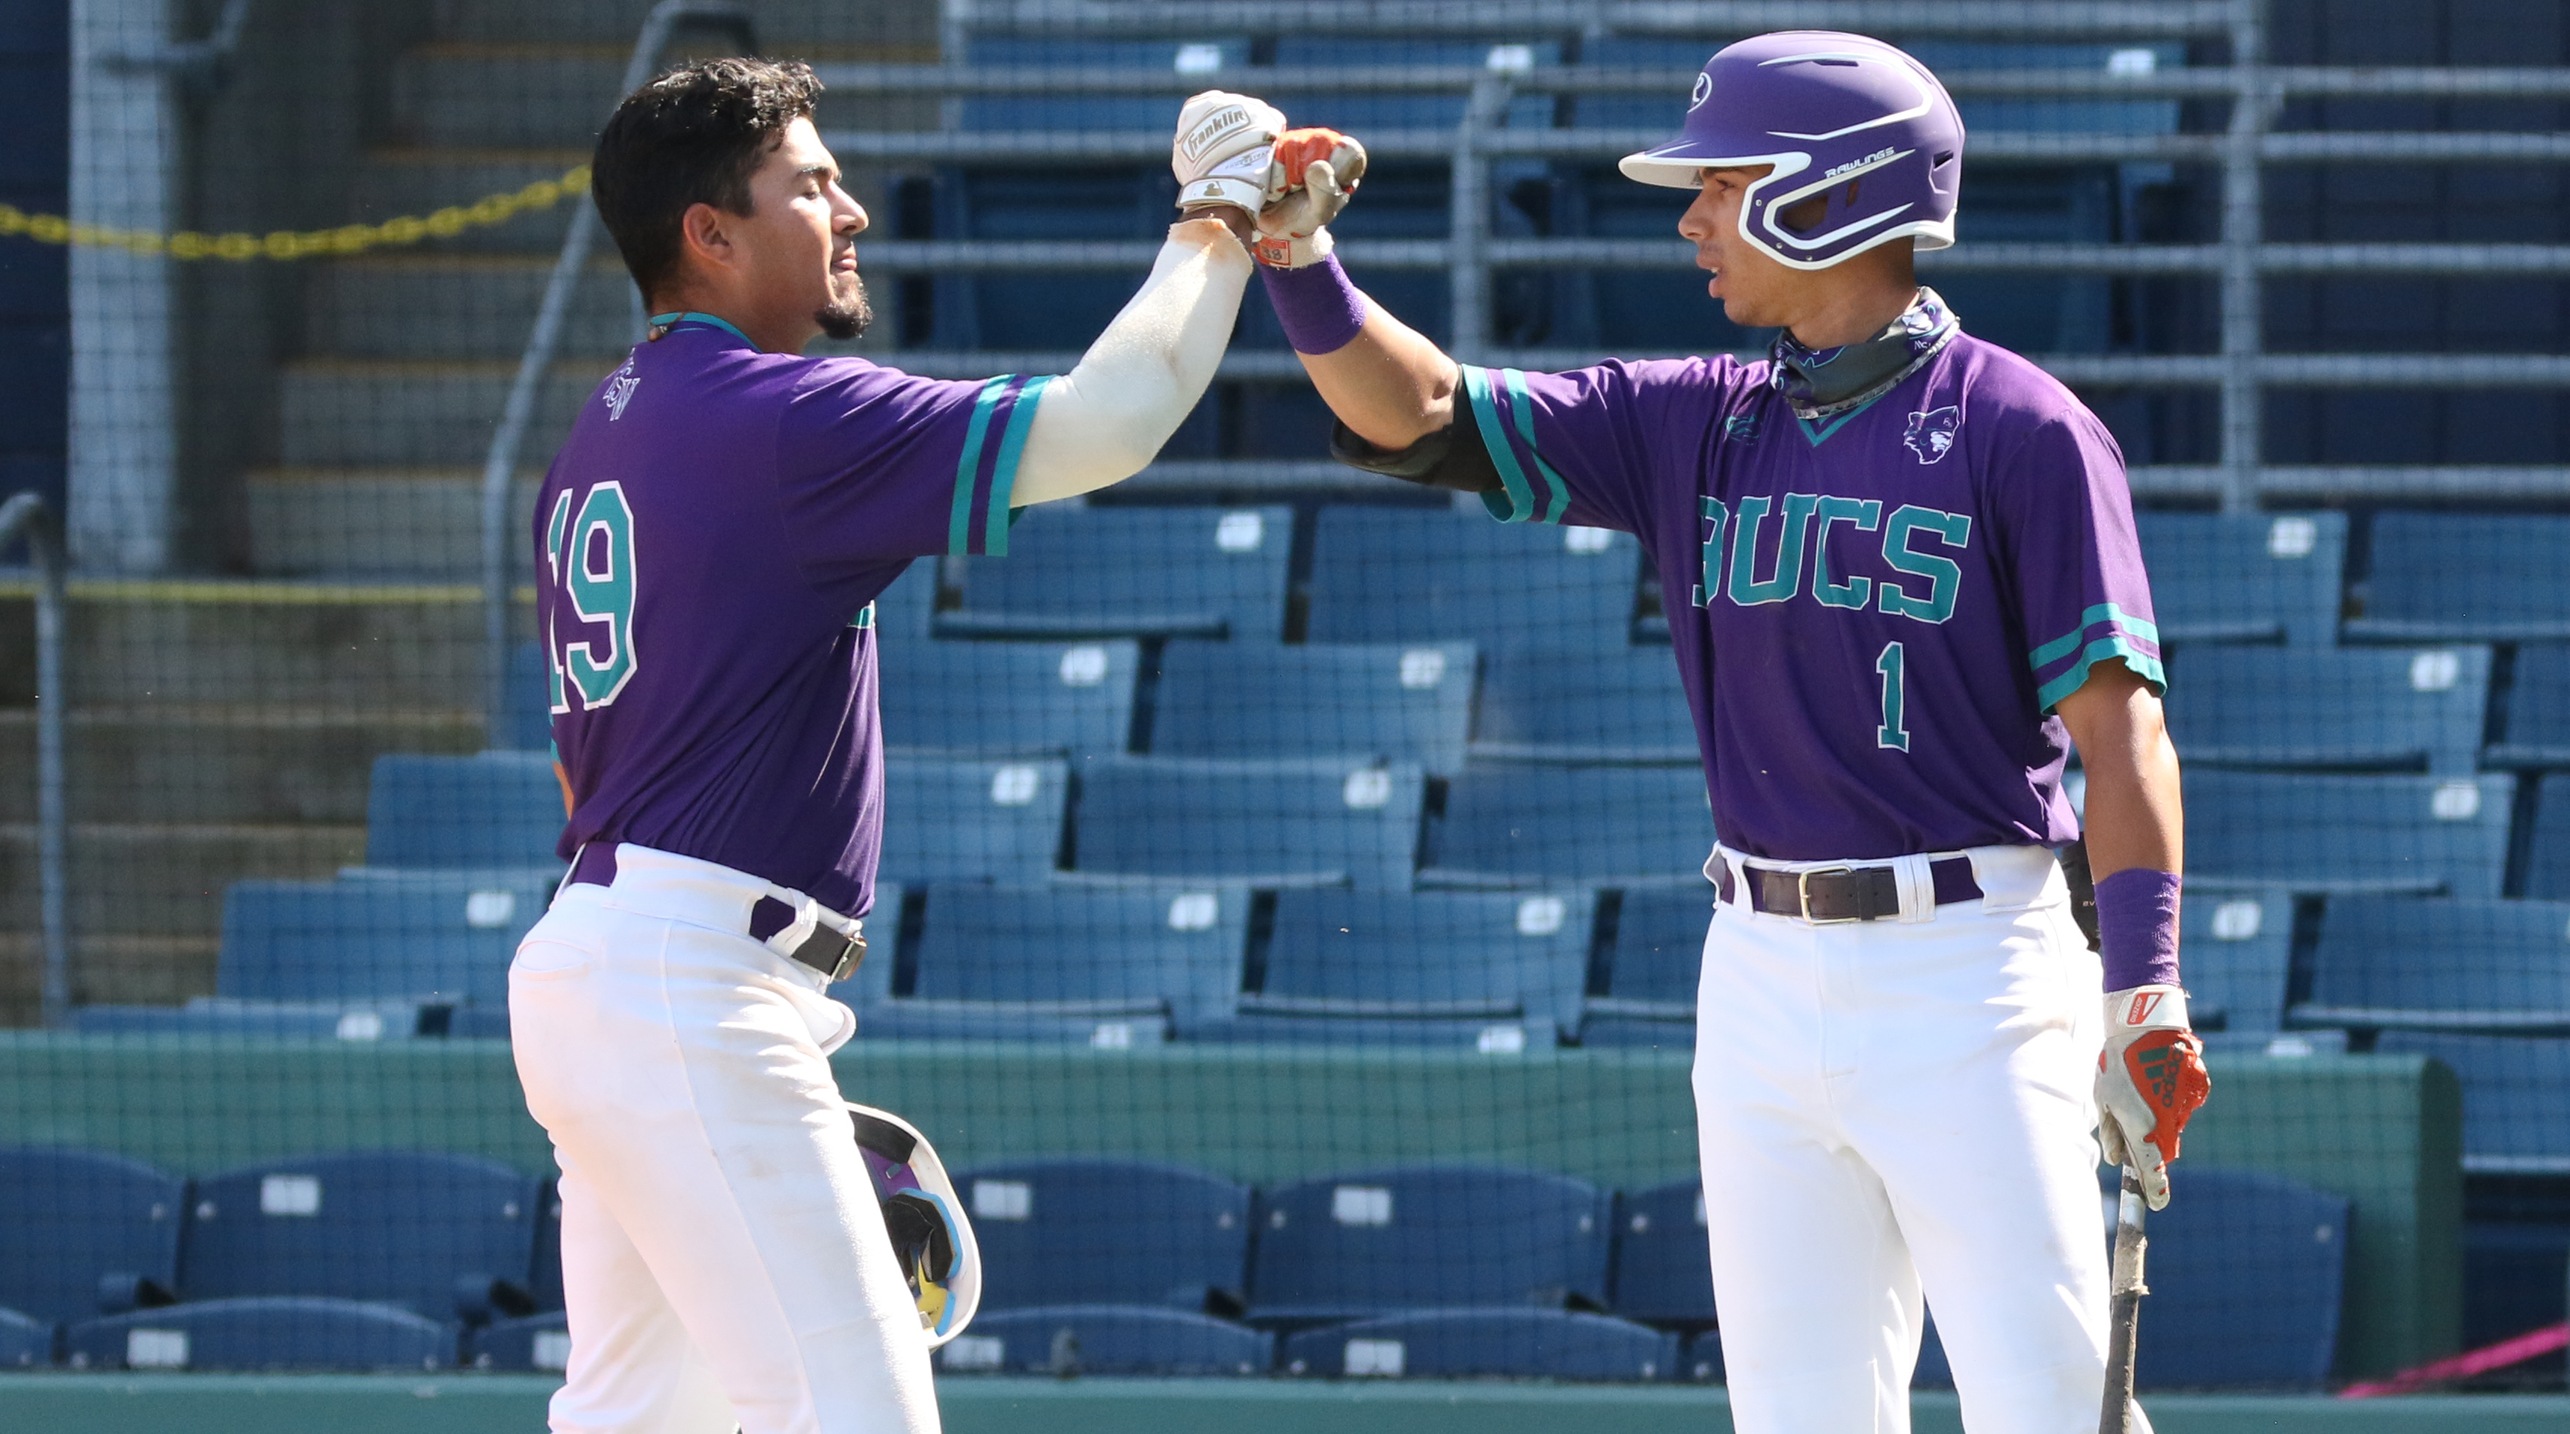 Christian Lucio celebrates his first inning home run with Luis Tuero (Photo by Roy Allen)